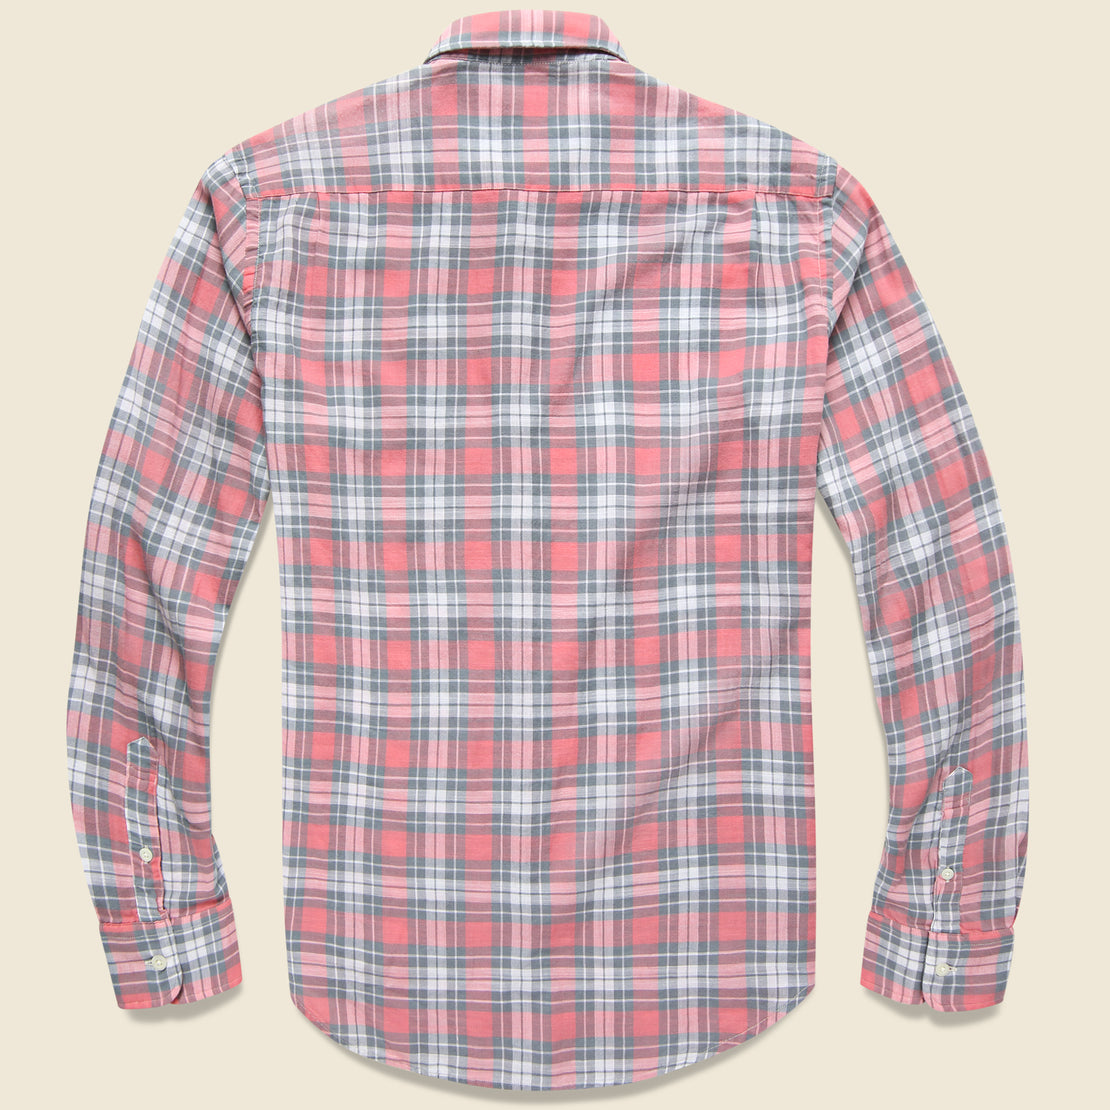 Ventura Shirt - Sierra Rose Cream - Faherty - STAG Provisions - Tops - L/S Woven - Plaid